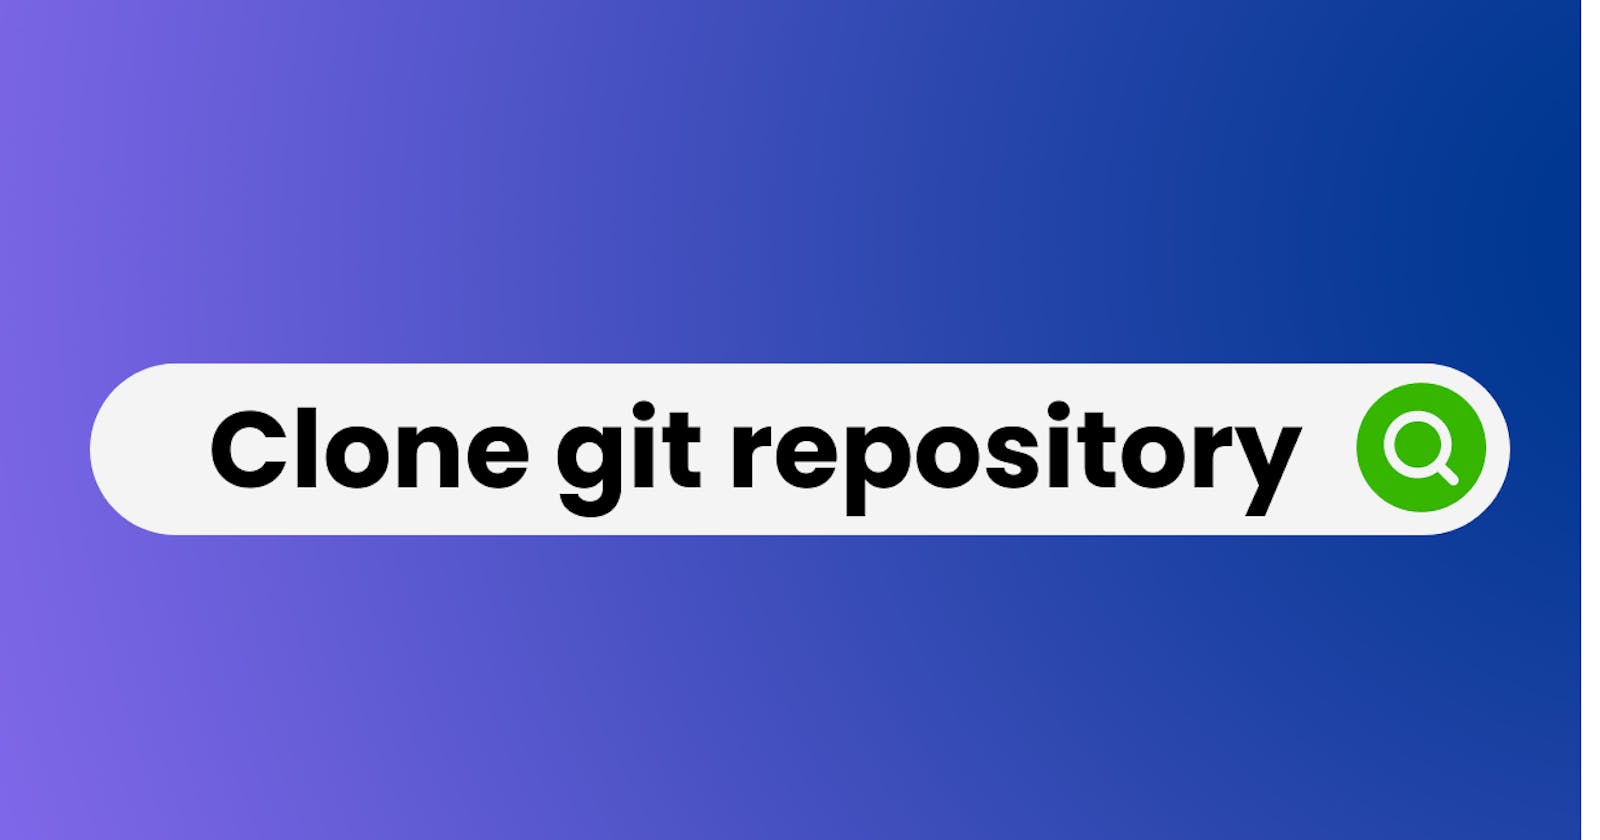 How to clone a git repository ?